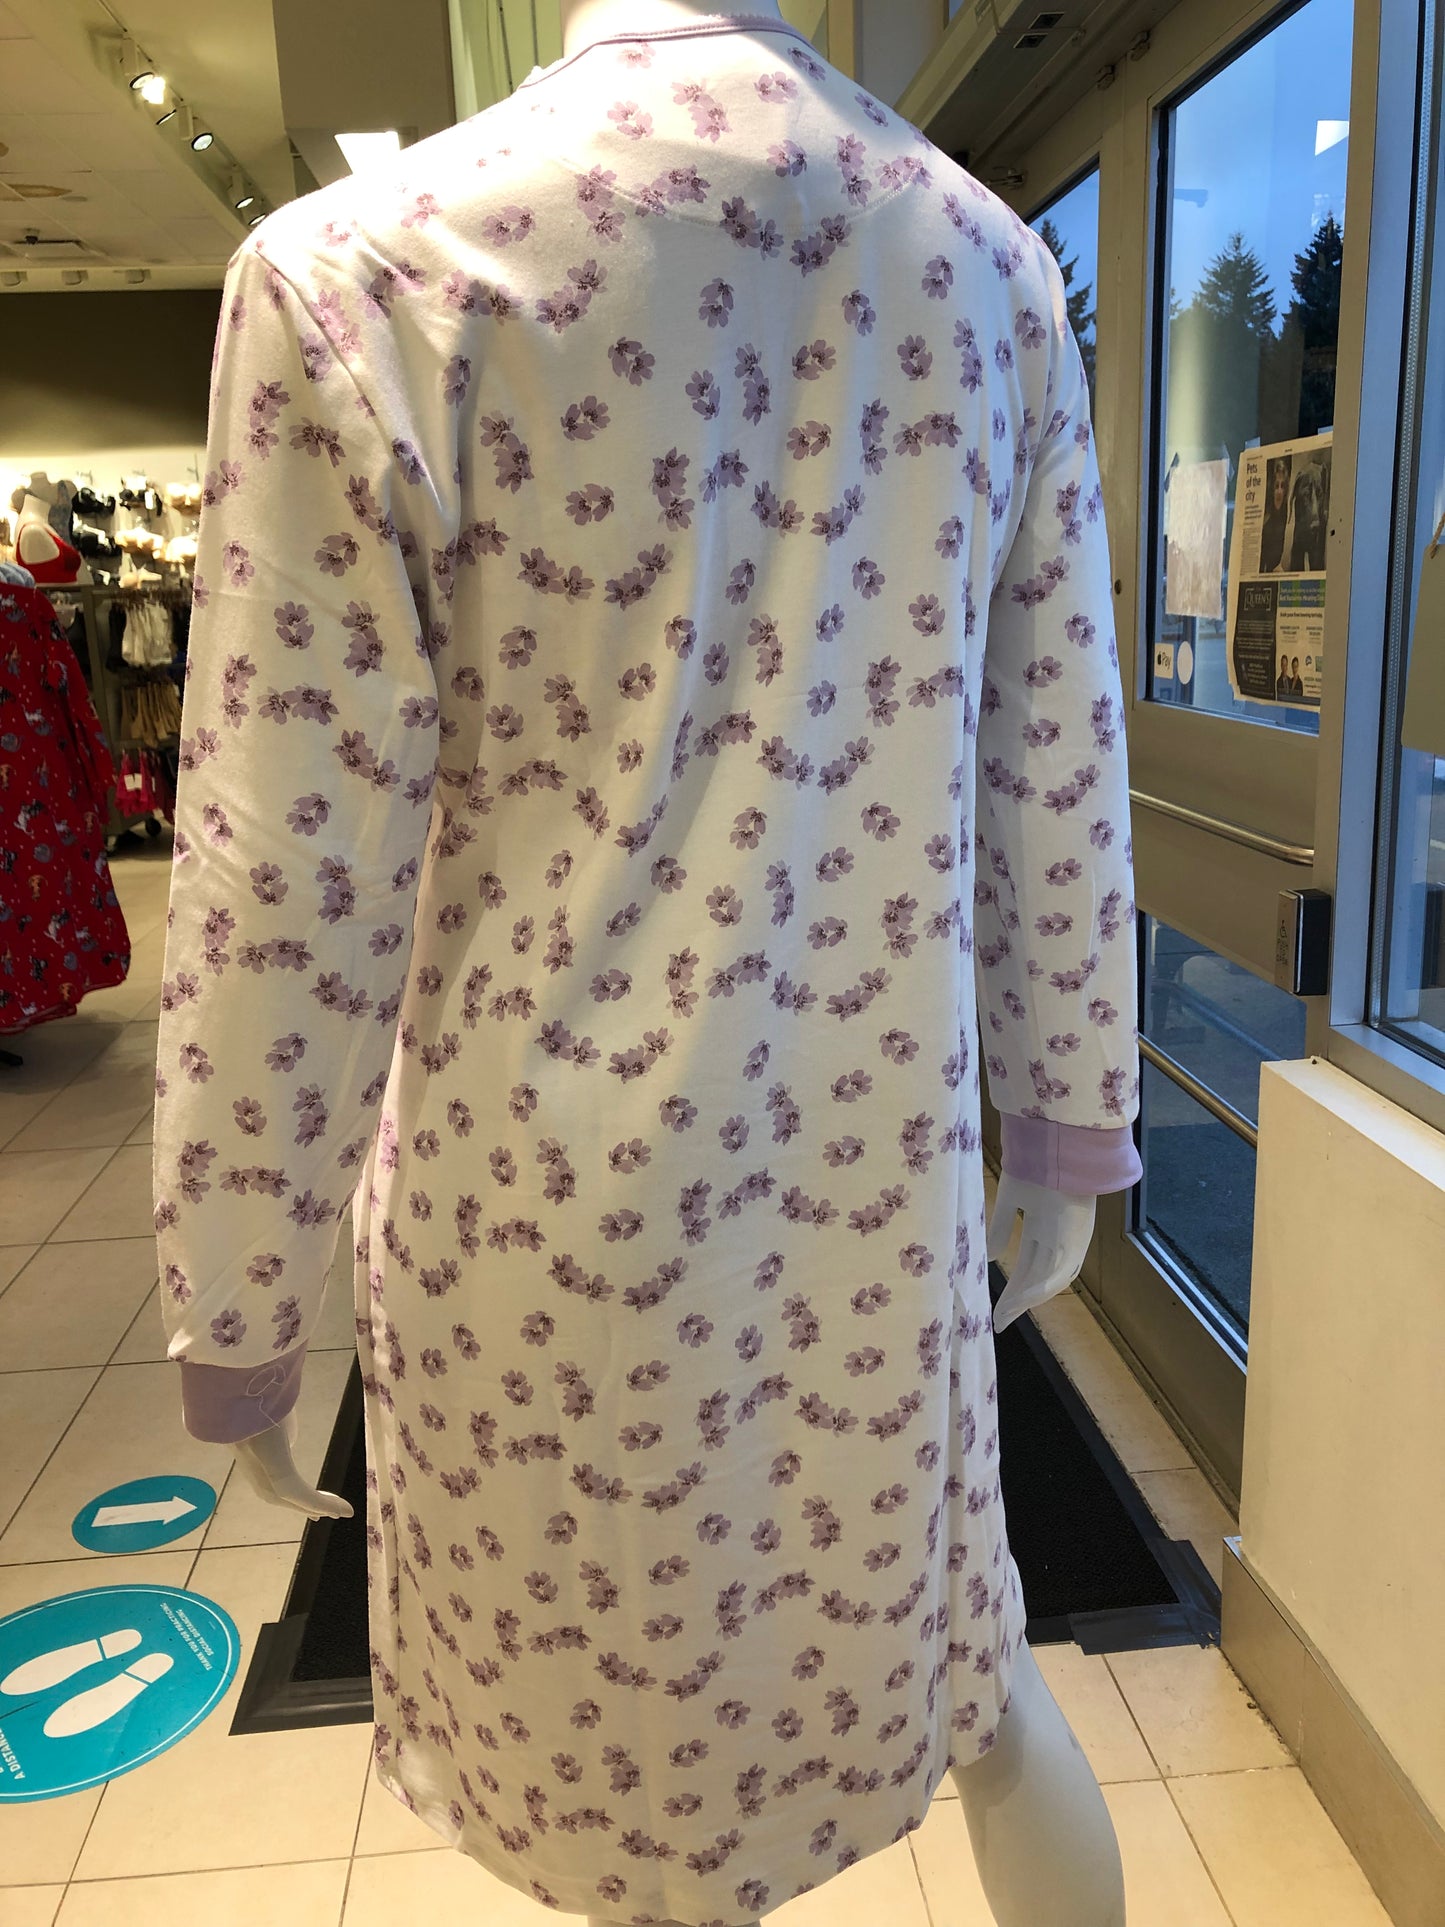 100% Cotton Long Sleeve Nightgown 51203 - Lavender Floral (Glicine)